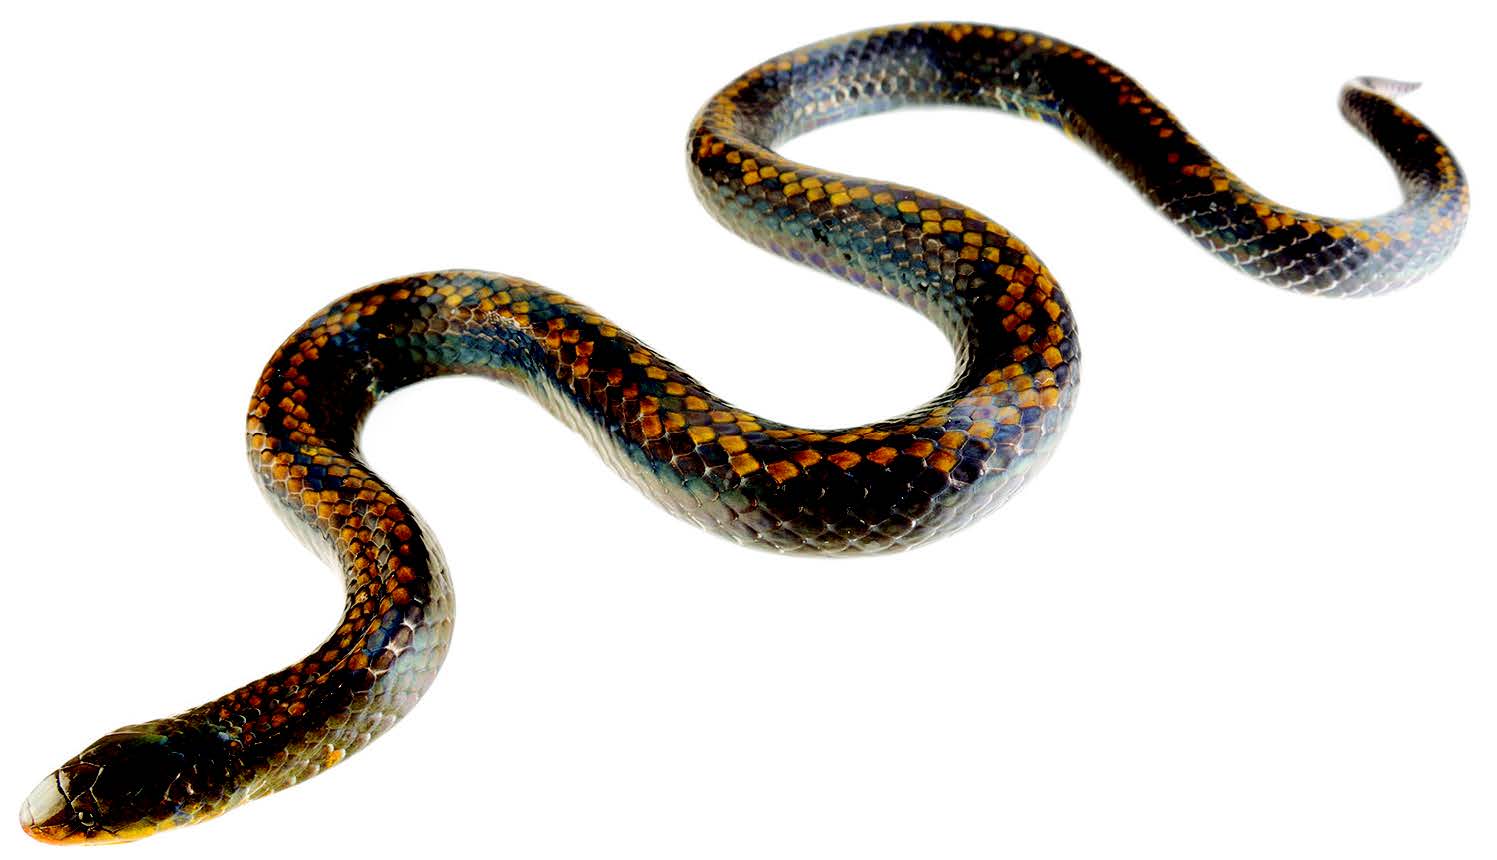 New Species of Cobra-Like Snake Discovered – But It May Already Be Extinct  – The Wire Science